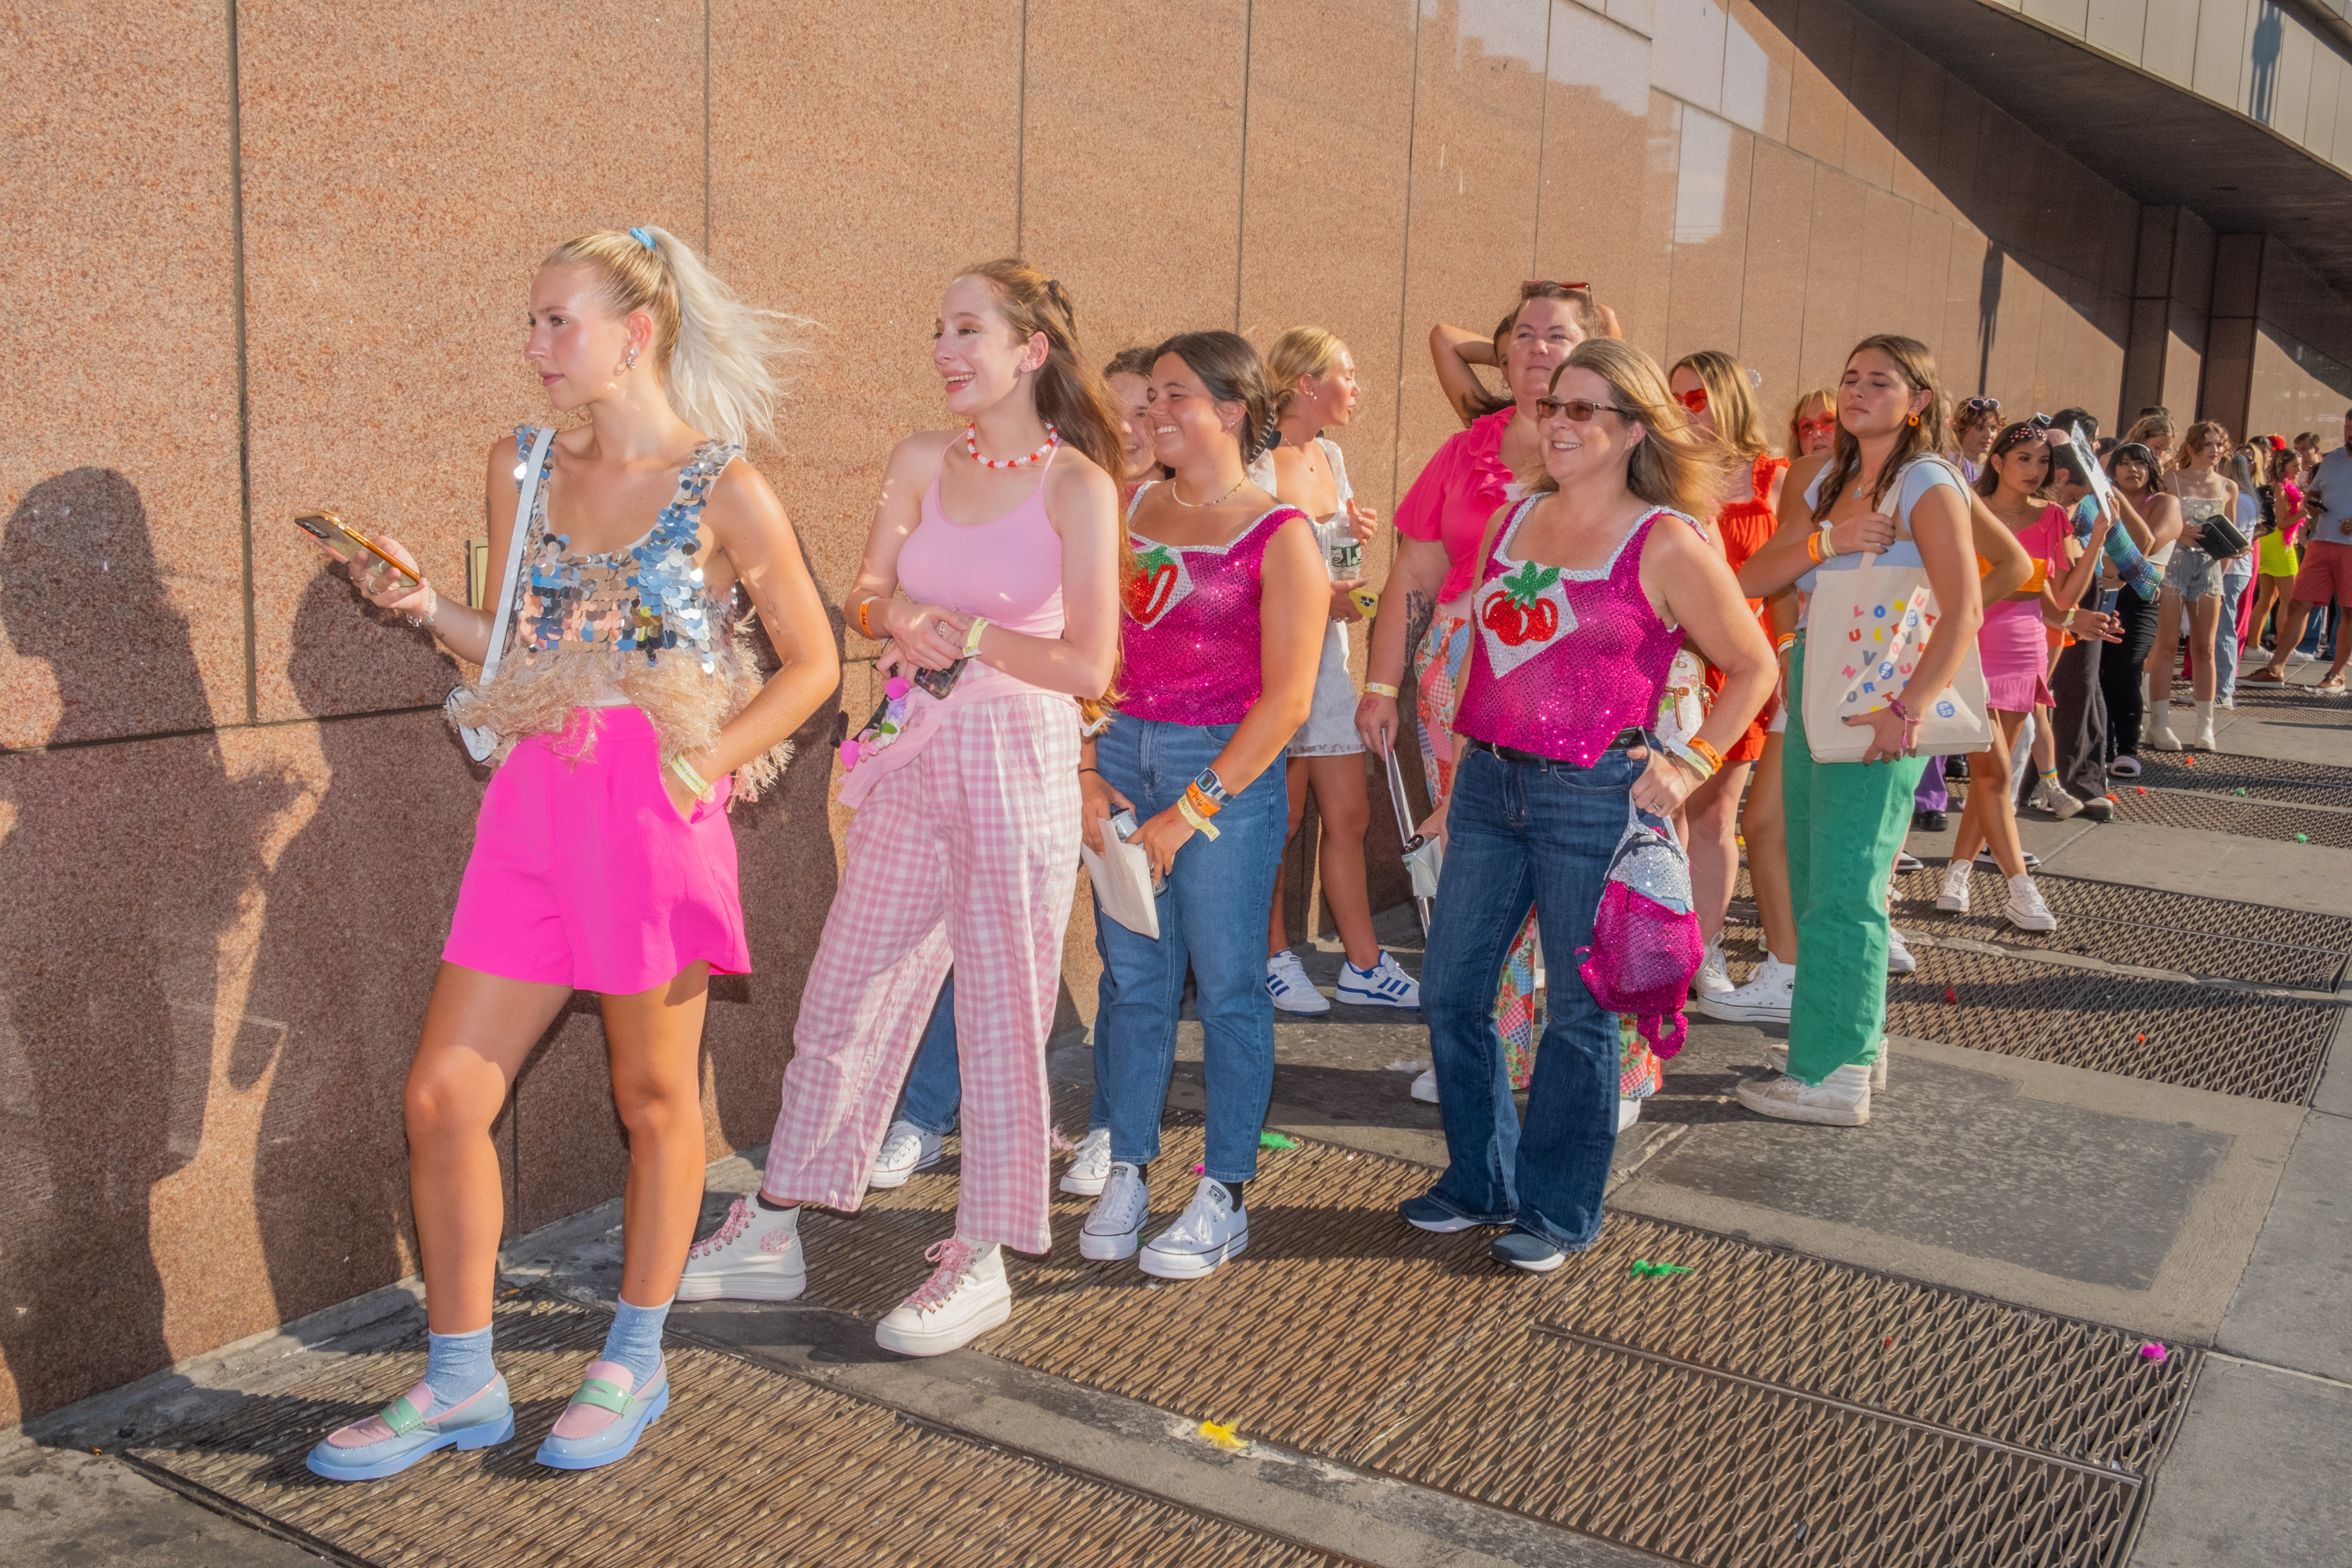 A line of people dressed in pink and other bright colors